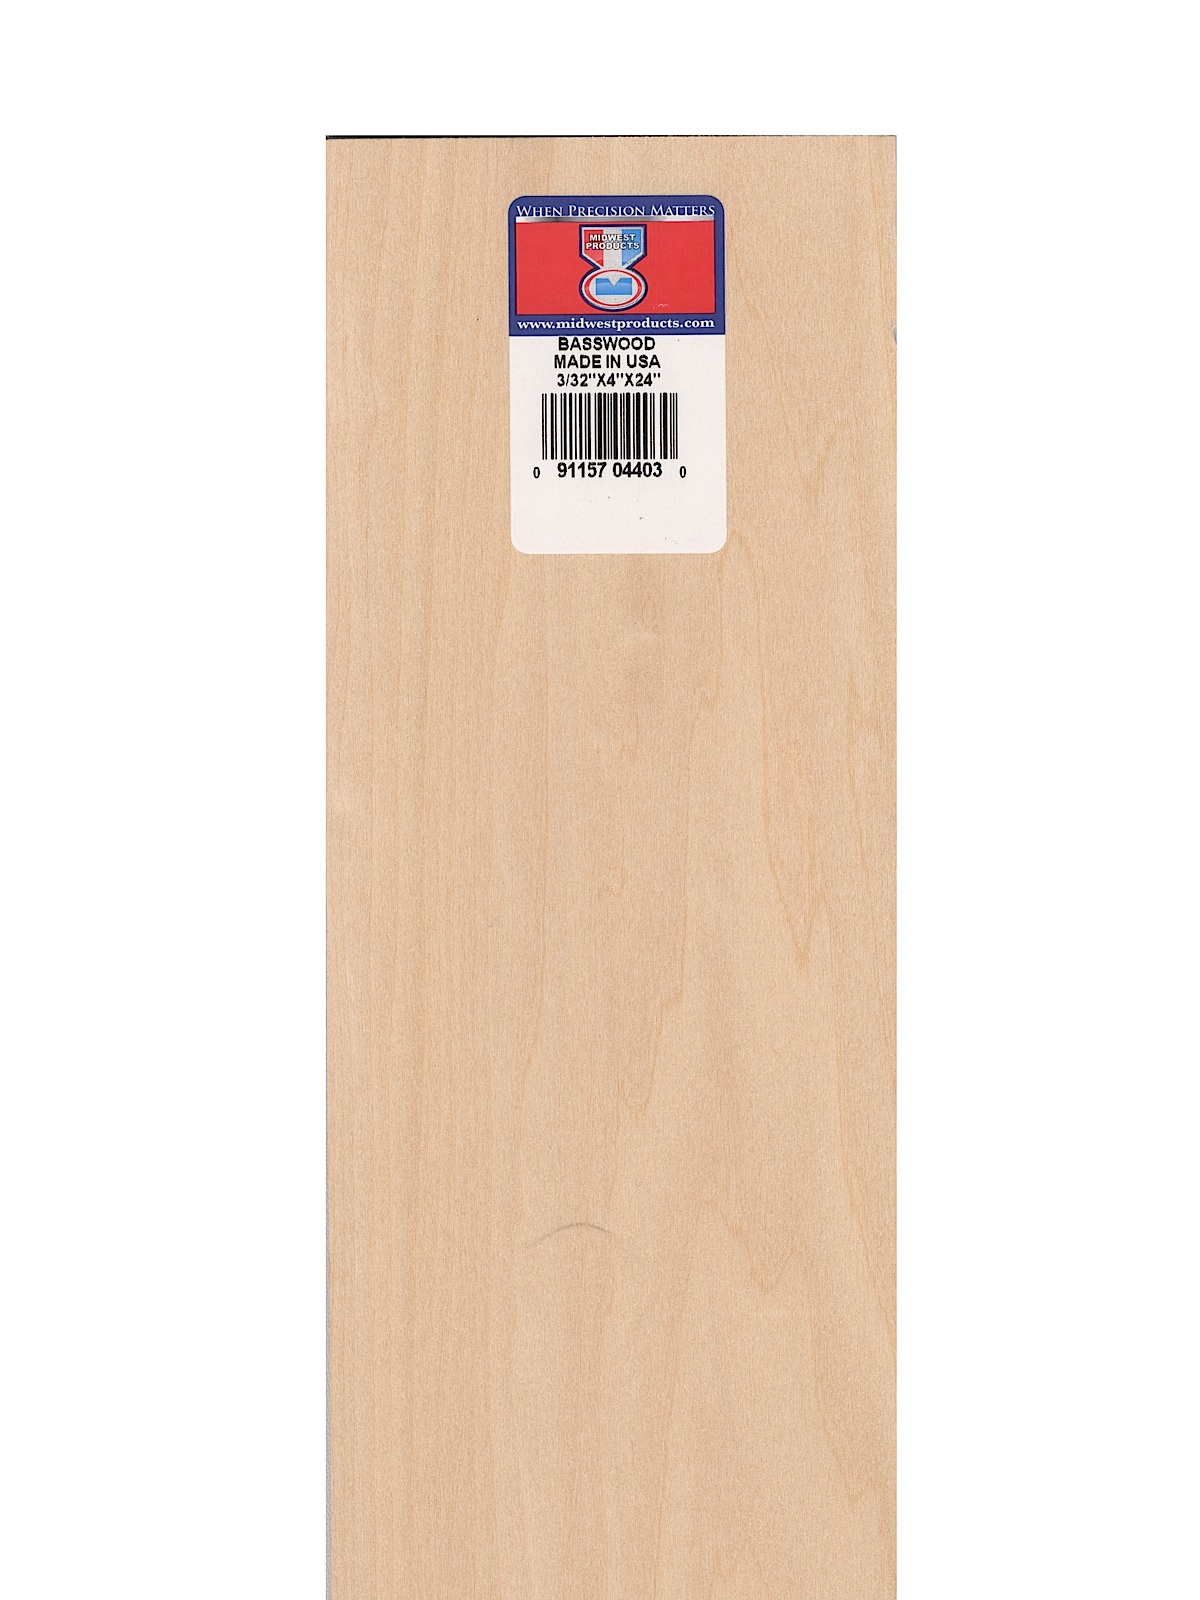 Basswood Sheets 3 32 In. 4 In. X 24 In.